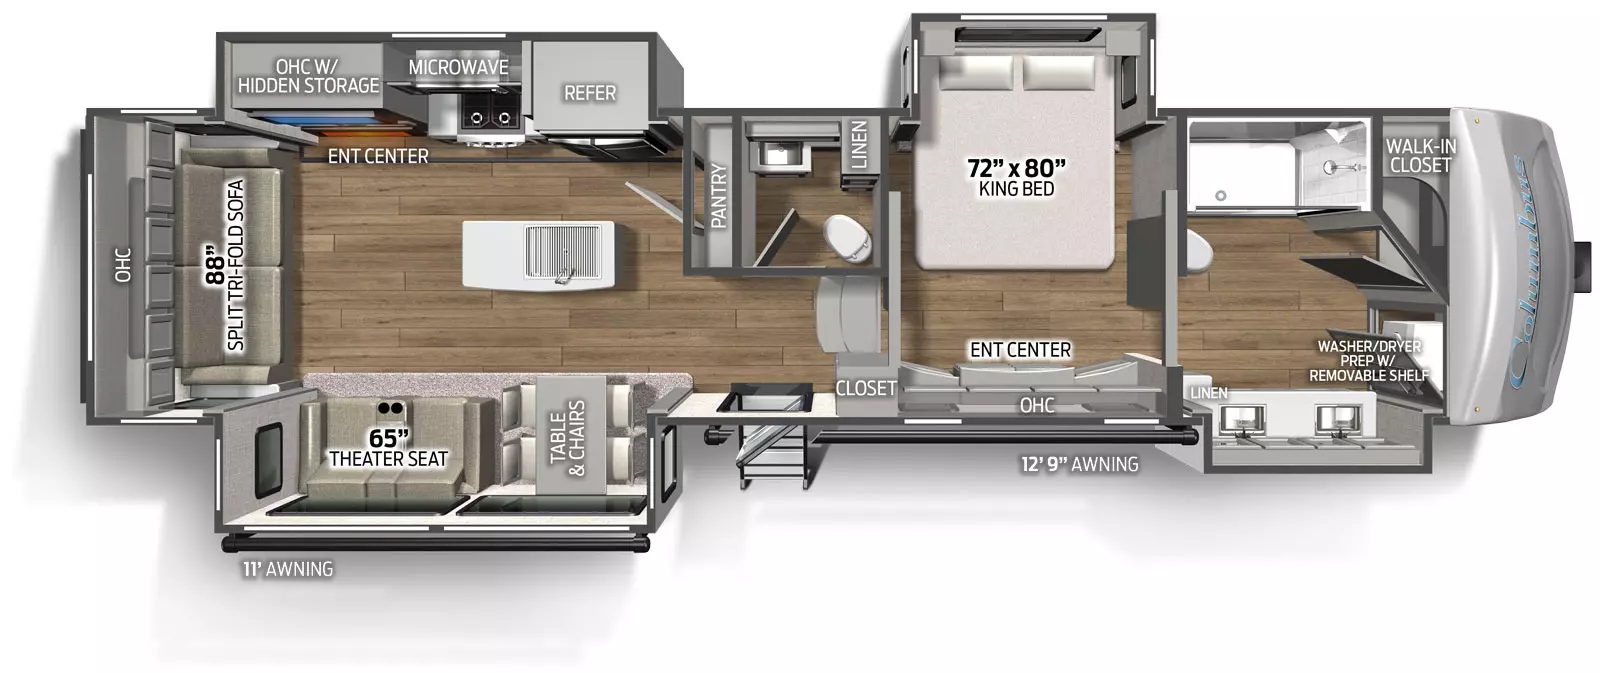 The 383FB has 4 slide outs, 2 on the road side and two on the camp side, along with one entry door on the camp side. Interior layout from front to back: front bathroom with walk in closet and two sinks and cabinets in the camp side slide out, bedroom with king size bed in the road side slide out, half bath, kitchen dining, living area with the road side slide out containing residential refrigerator, cooktop with oven and overhead microwave, TV entertainment area; The camp side slide out containing freestanding table and chairs and theater seating. 